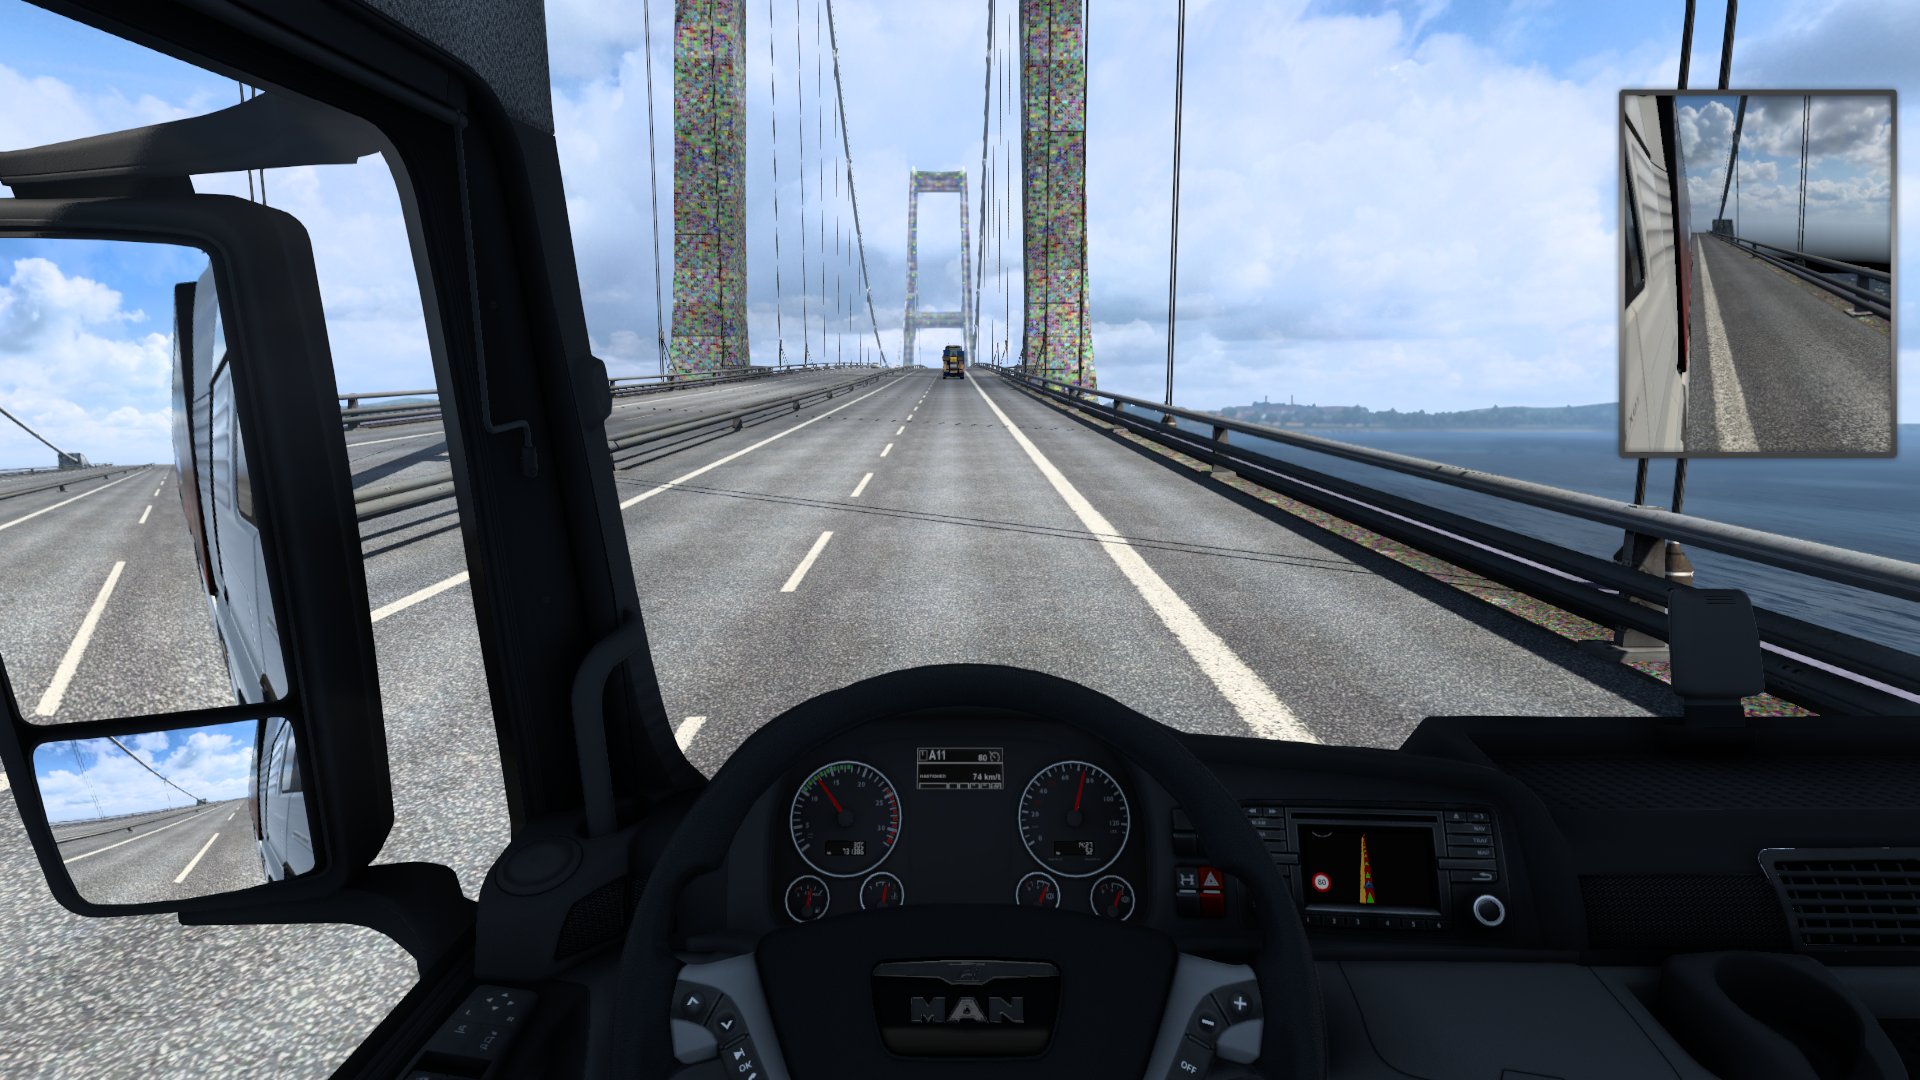 ets2_20210504_161627_00.png